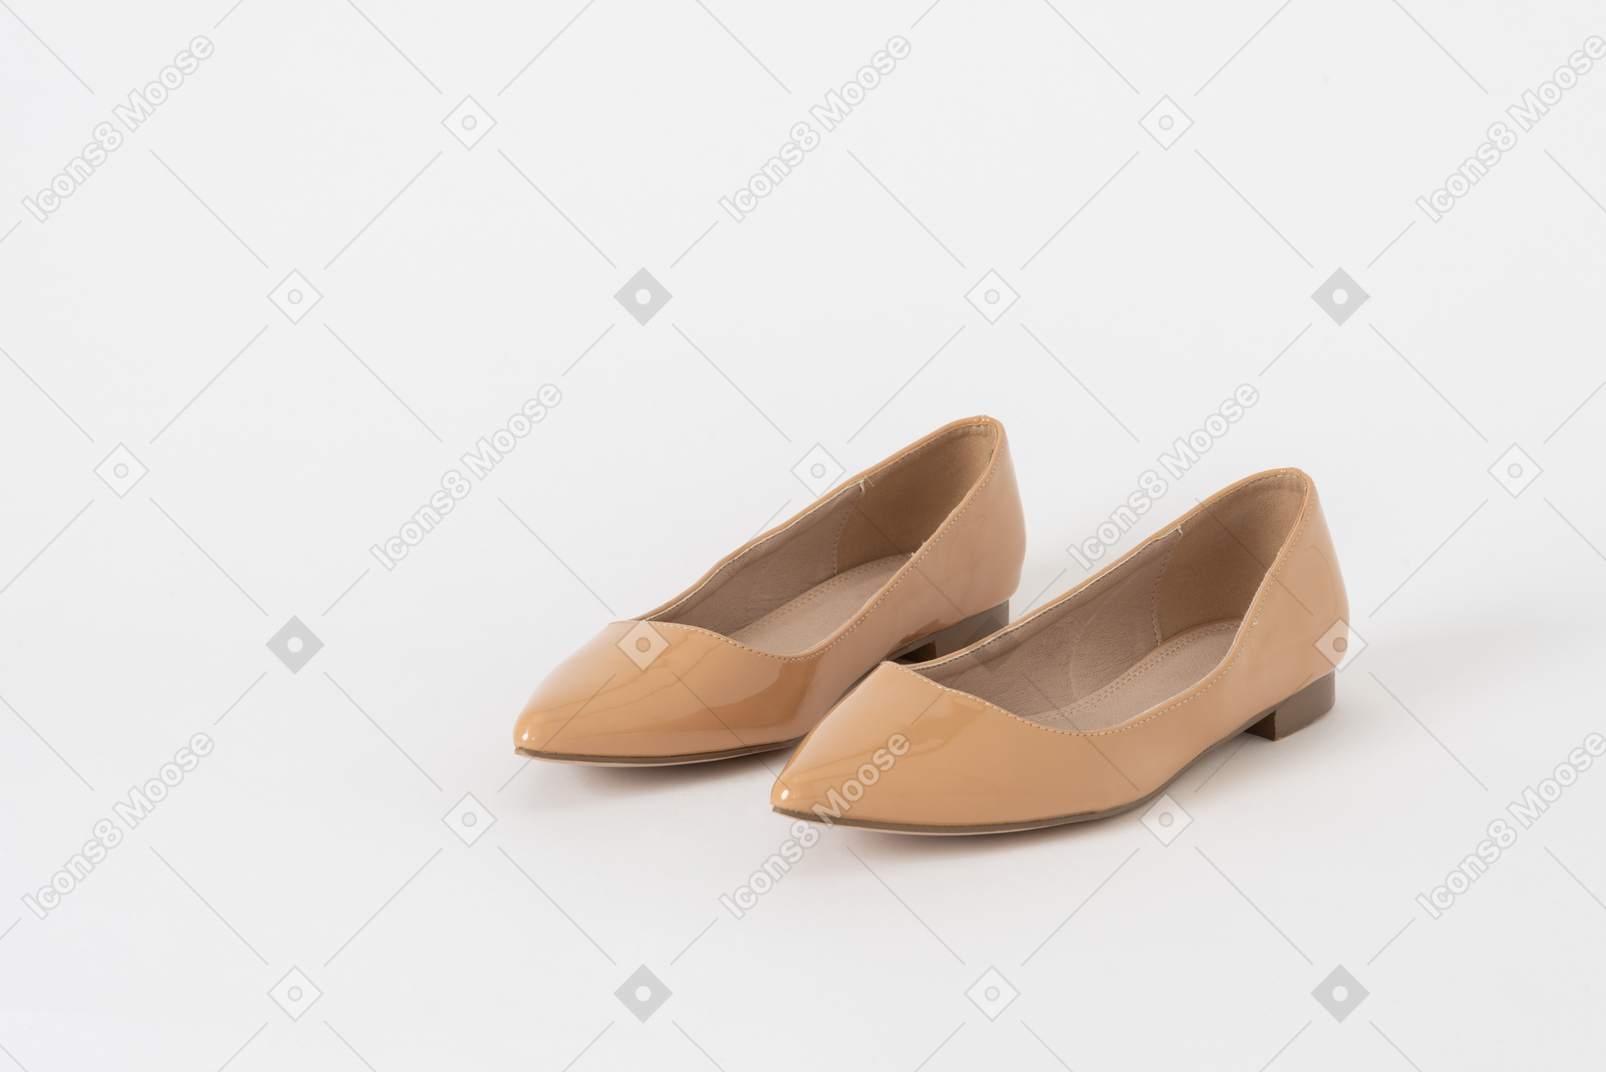 A three-quarter front shot of a pair of beige lacquer low heel shoes